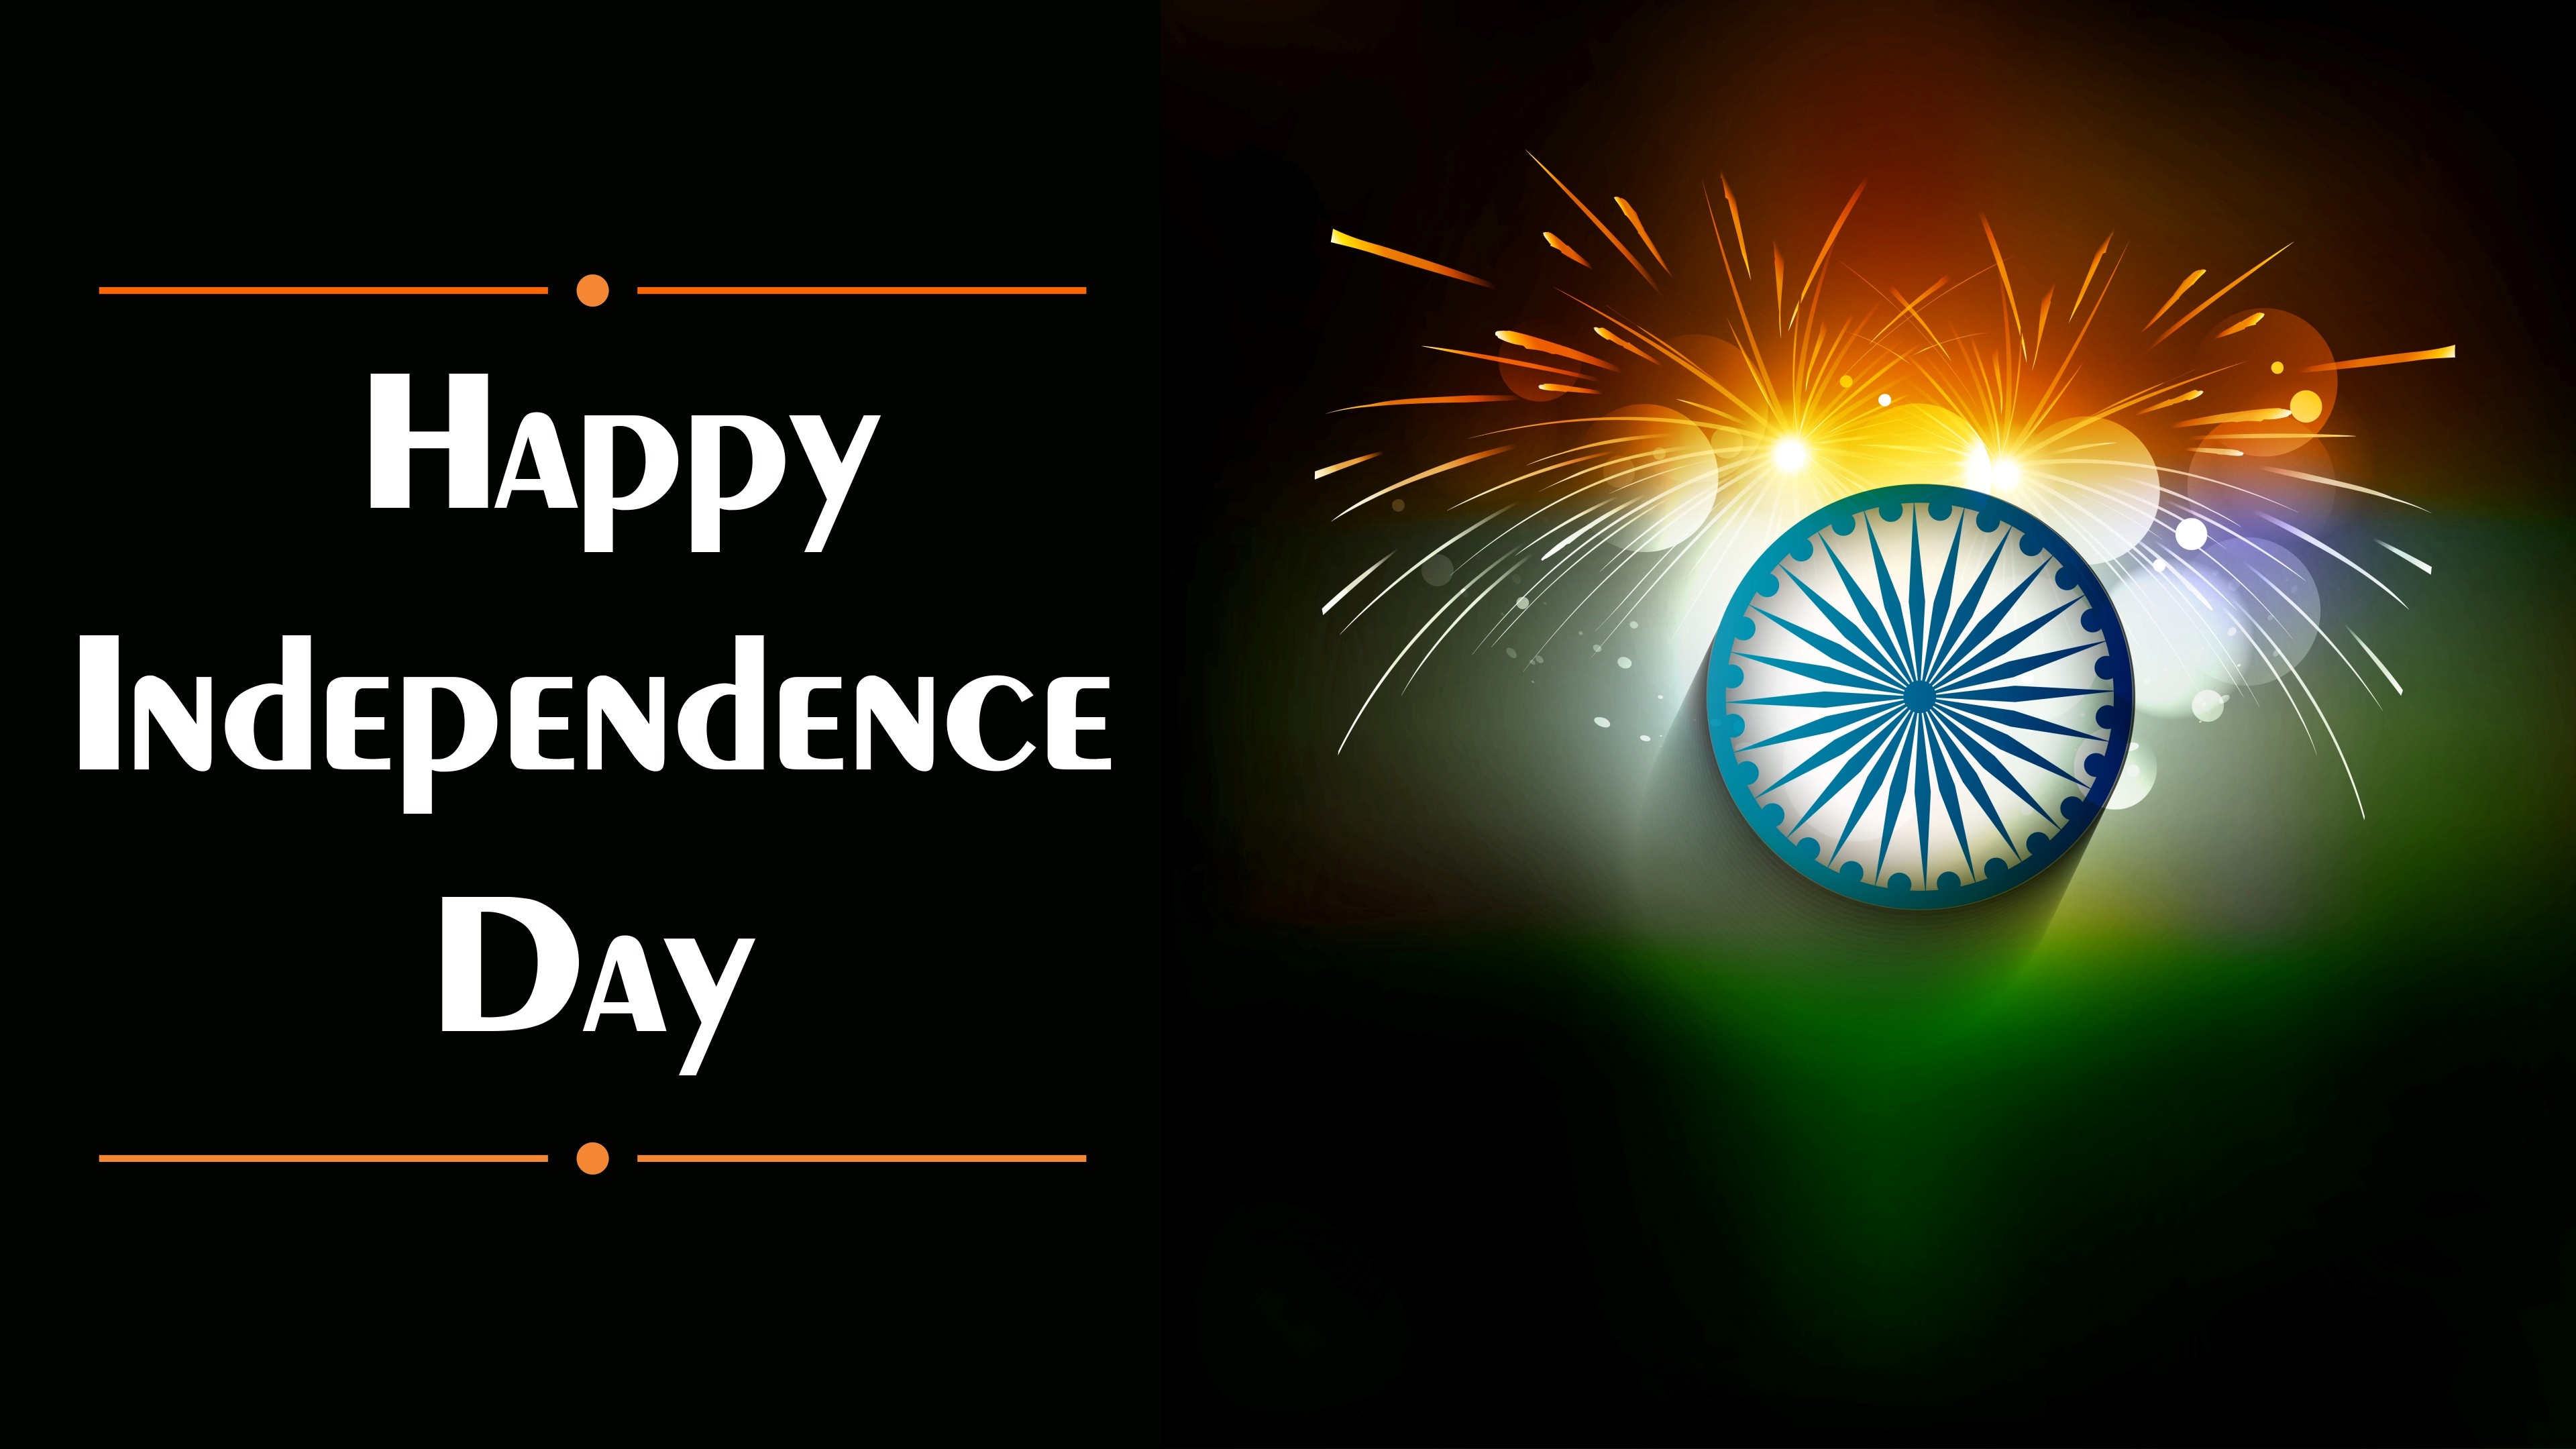 Independence Day Wishes 2018 Images, Messages, Quotes & Greetings